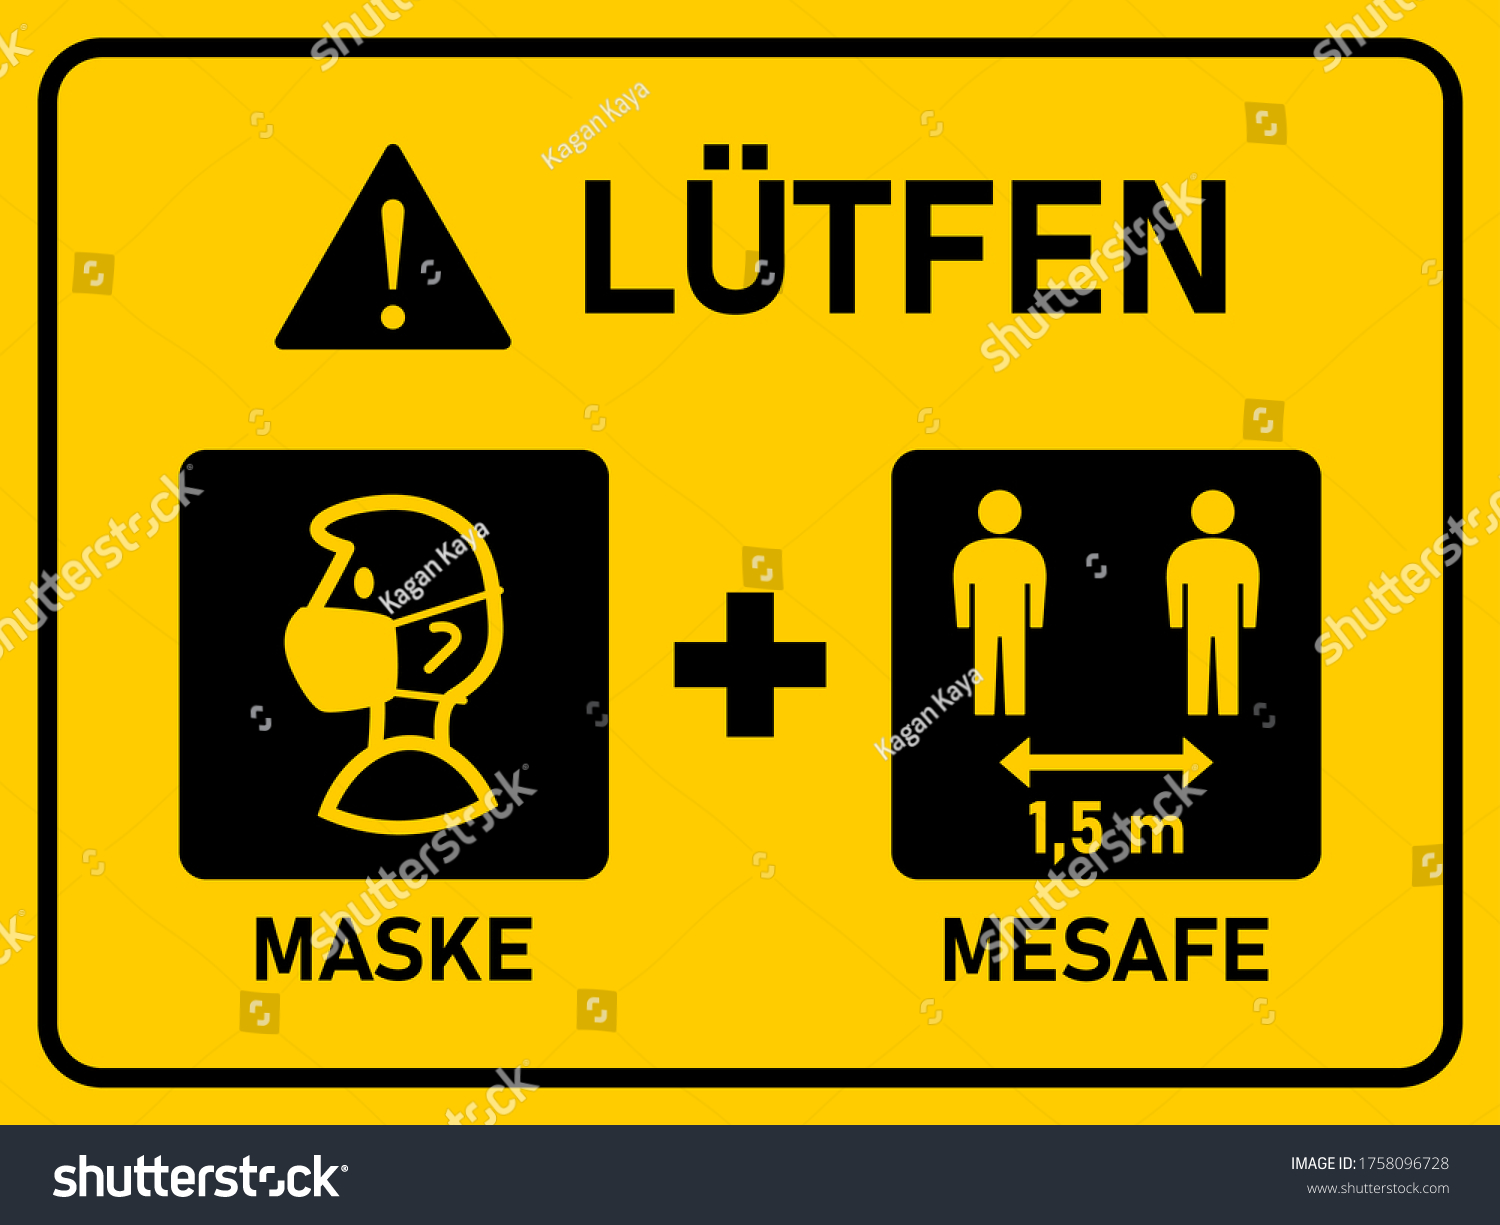 Horizontal Signboard with Basic Set of Measures against the Spread of Coronavirus in Turkish including Please Wear a Face Mask and Keep Your Distance 1,5 m or 1,5 Metres. Vector Image. #1758096728